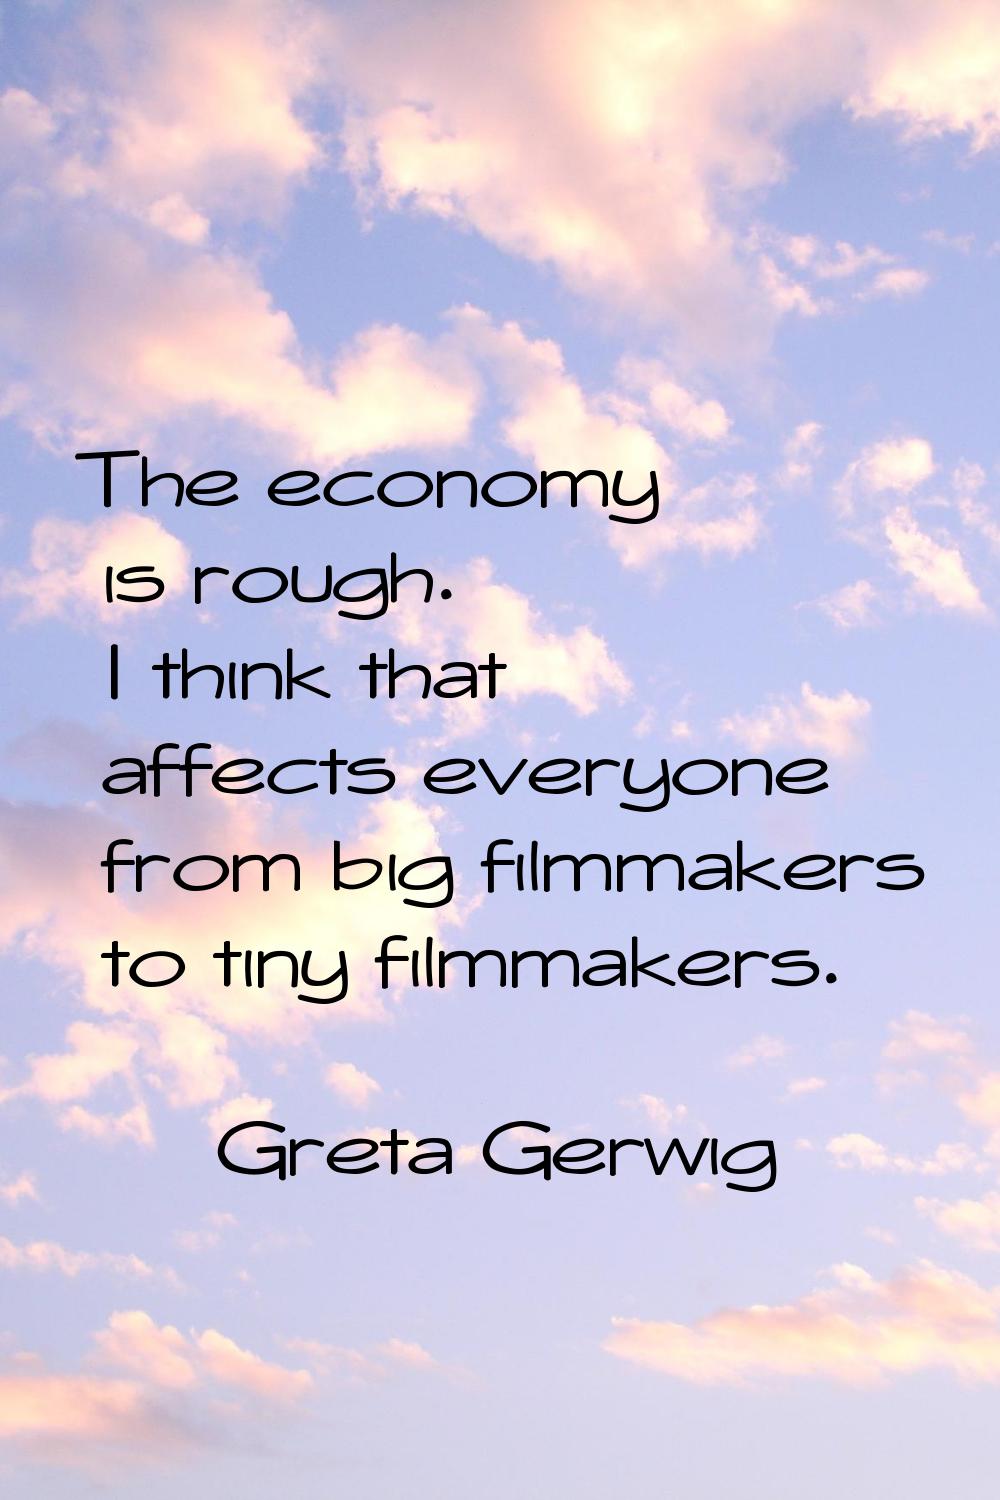 The economy is rough. I think that affects everyone from big filmmakers to tiny filmmakers.